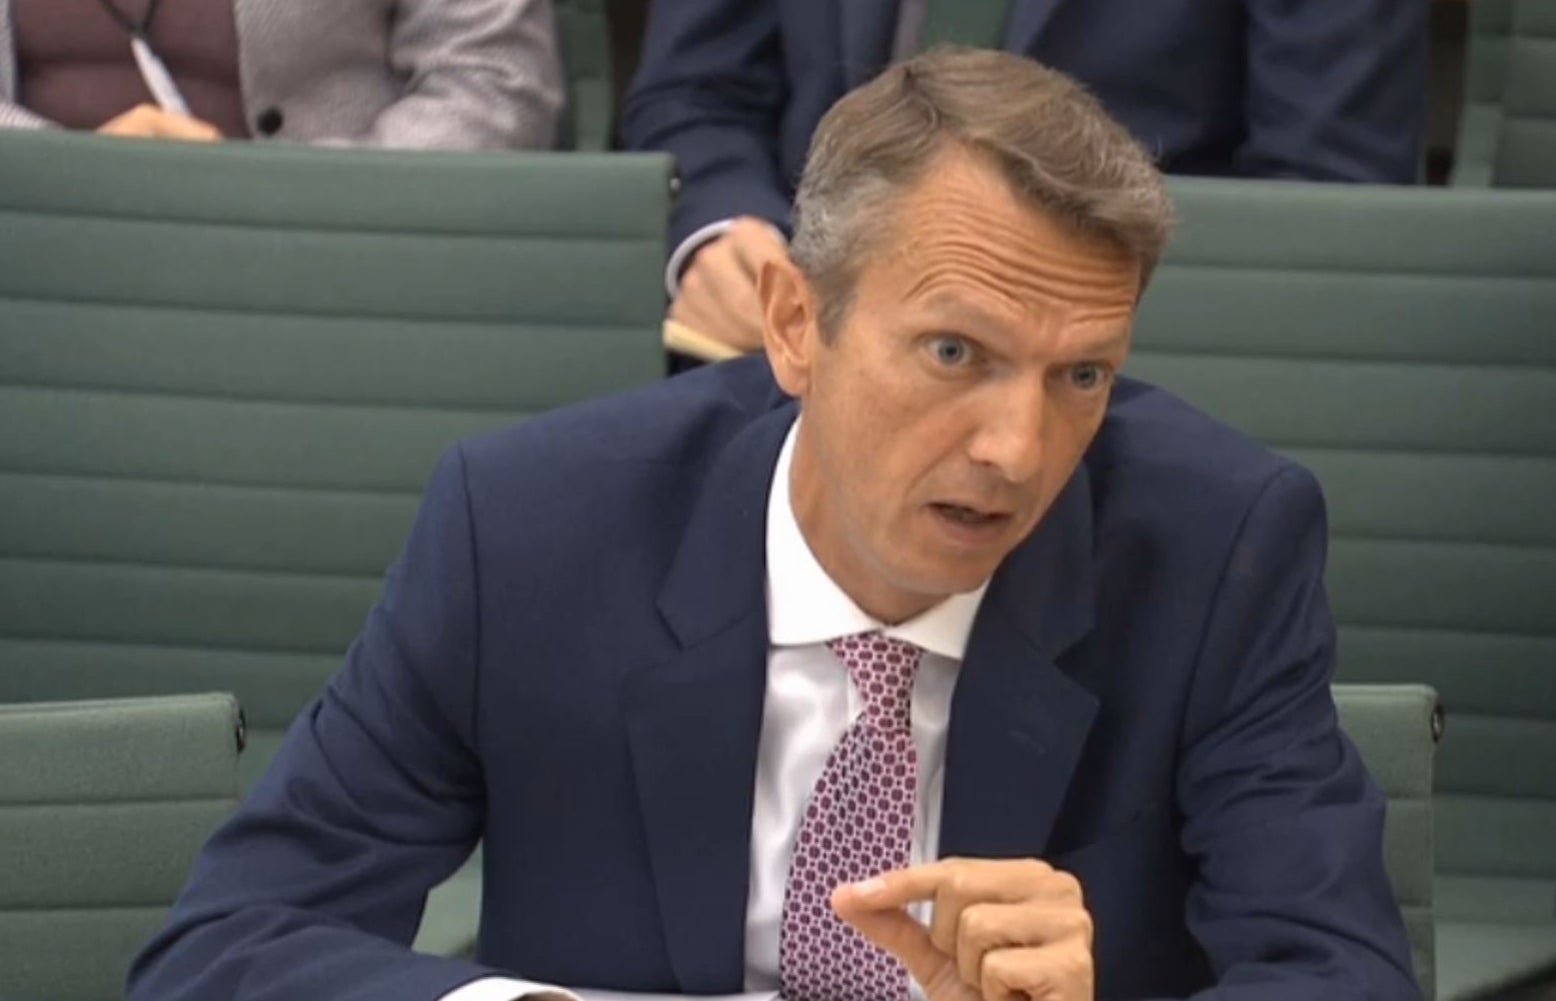 Former Bank of England chief economist Andy Haldane began calling for a rate rise last summer as inflation ticked higher (PA)